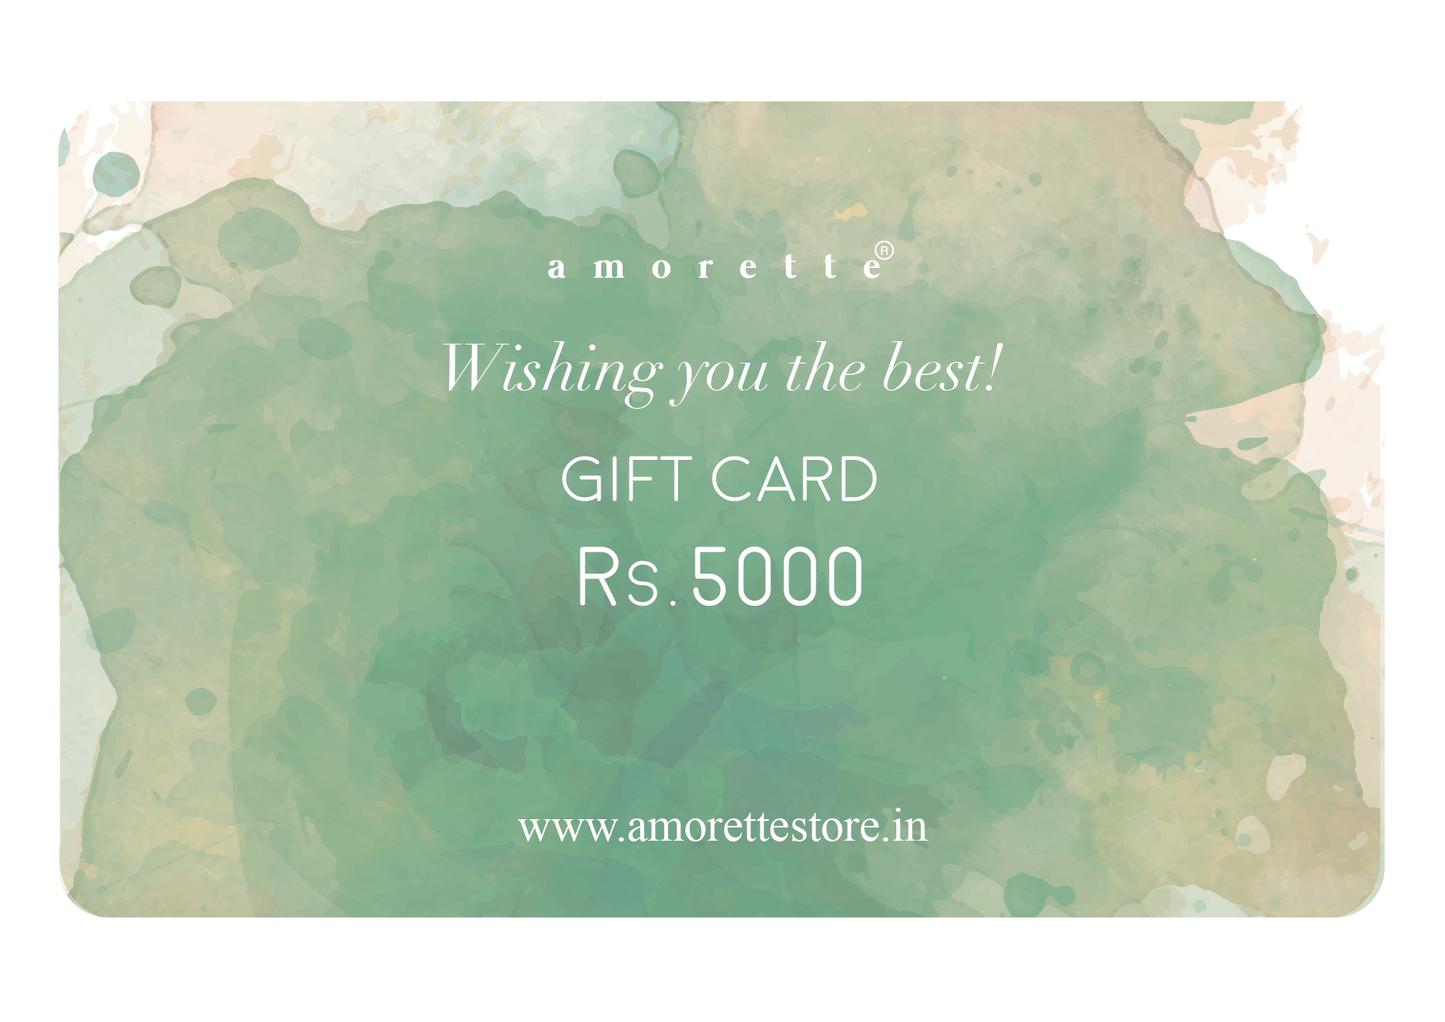 Amorette Store Gift Card (INR 5000)